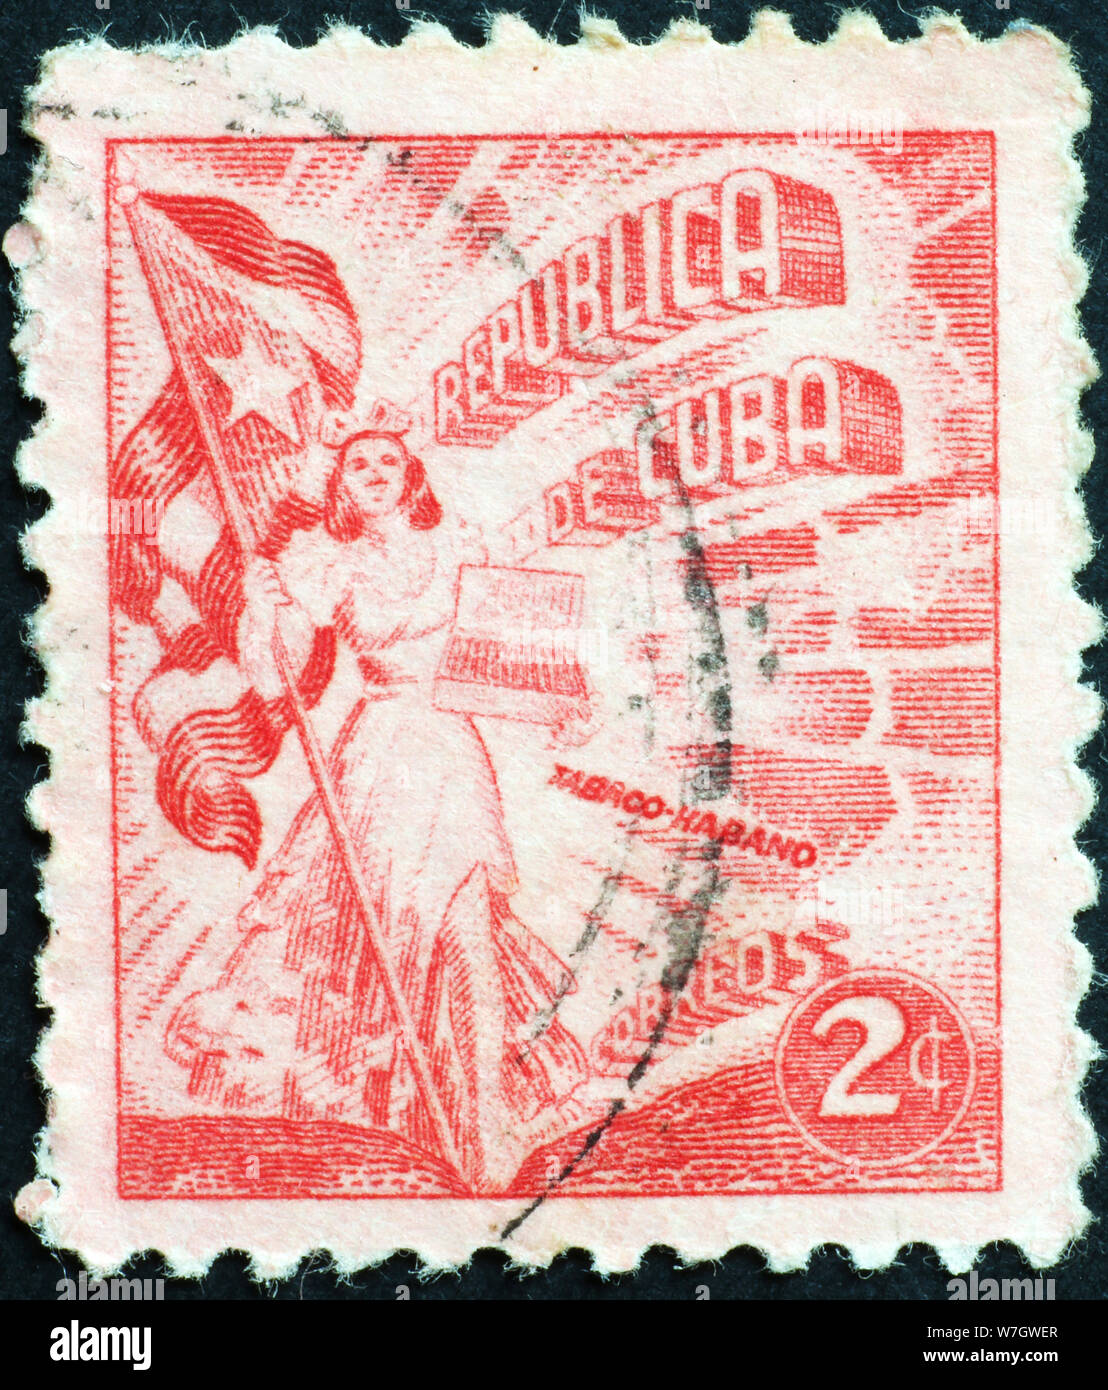 Vintage ad for cuban tobacco on old postage stamp Stock Photo